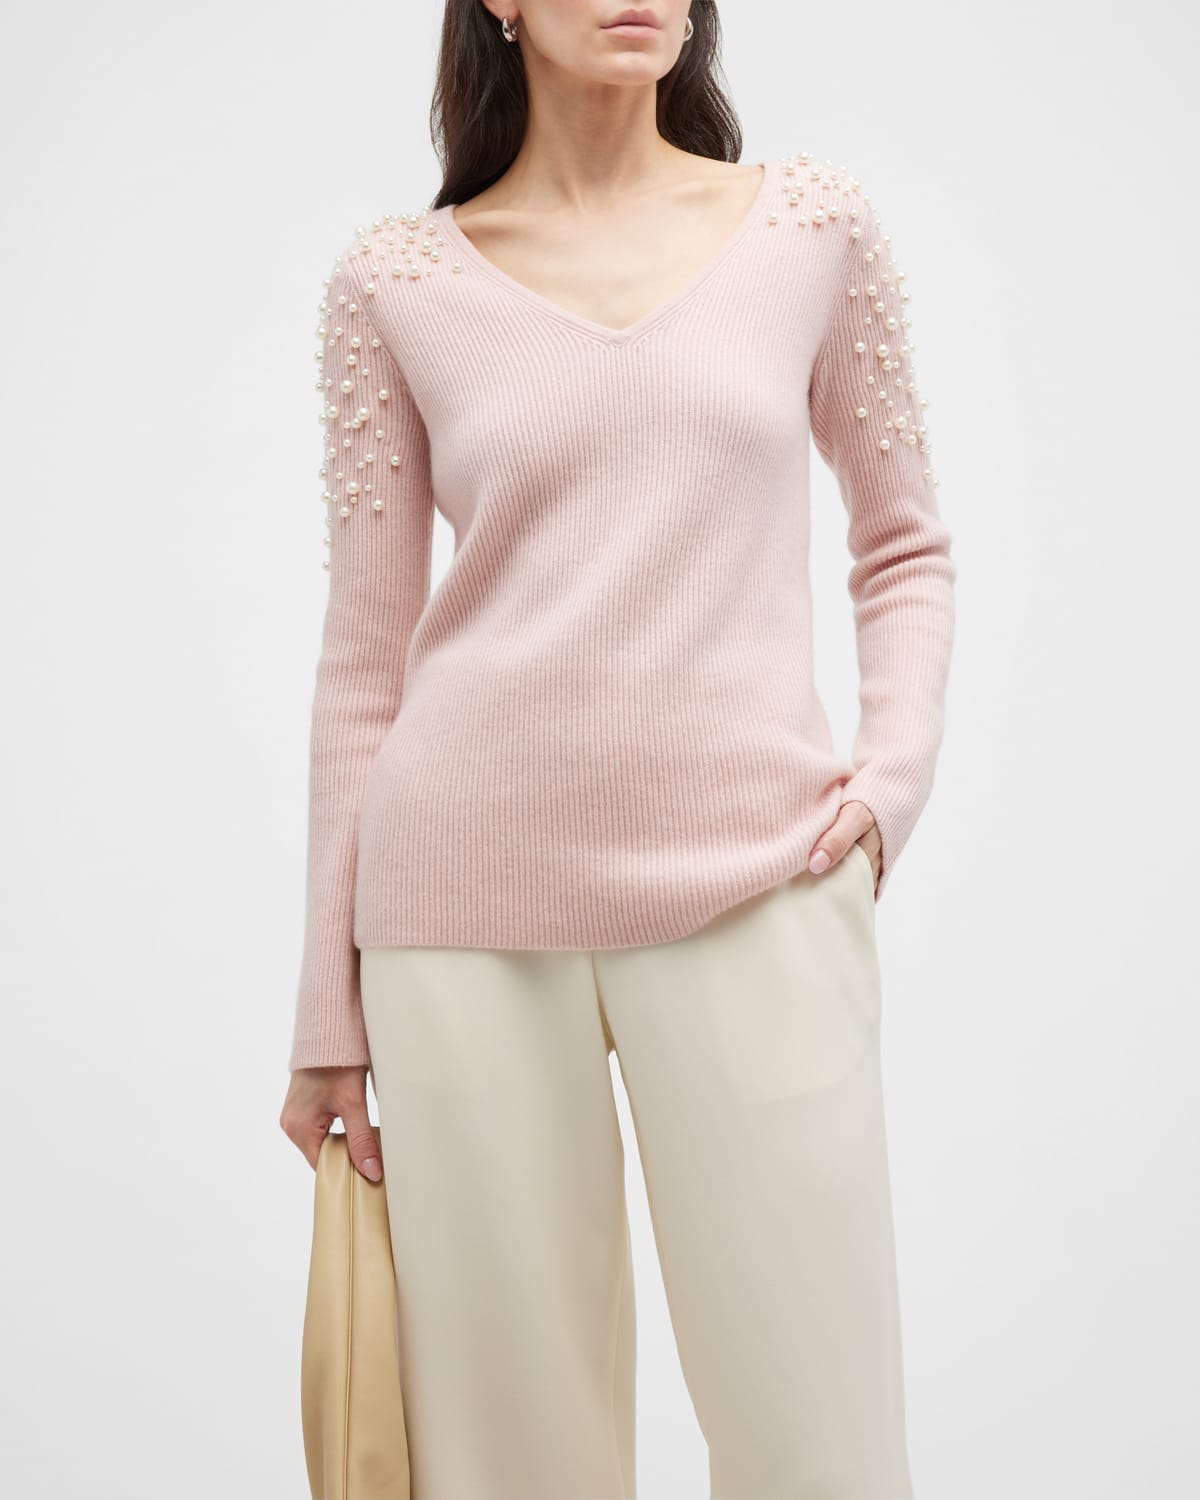 Neiman Marcus Cashmere Pearl Trim Embellished Sweater In Blush